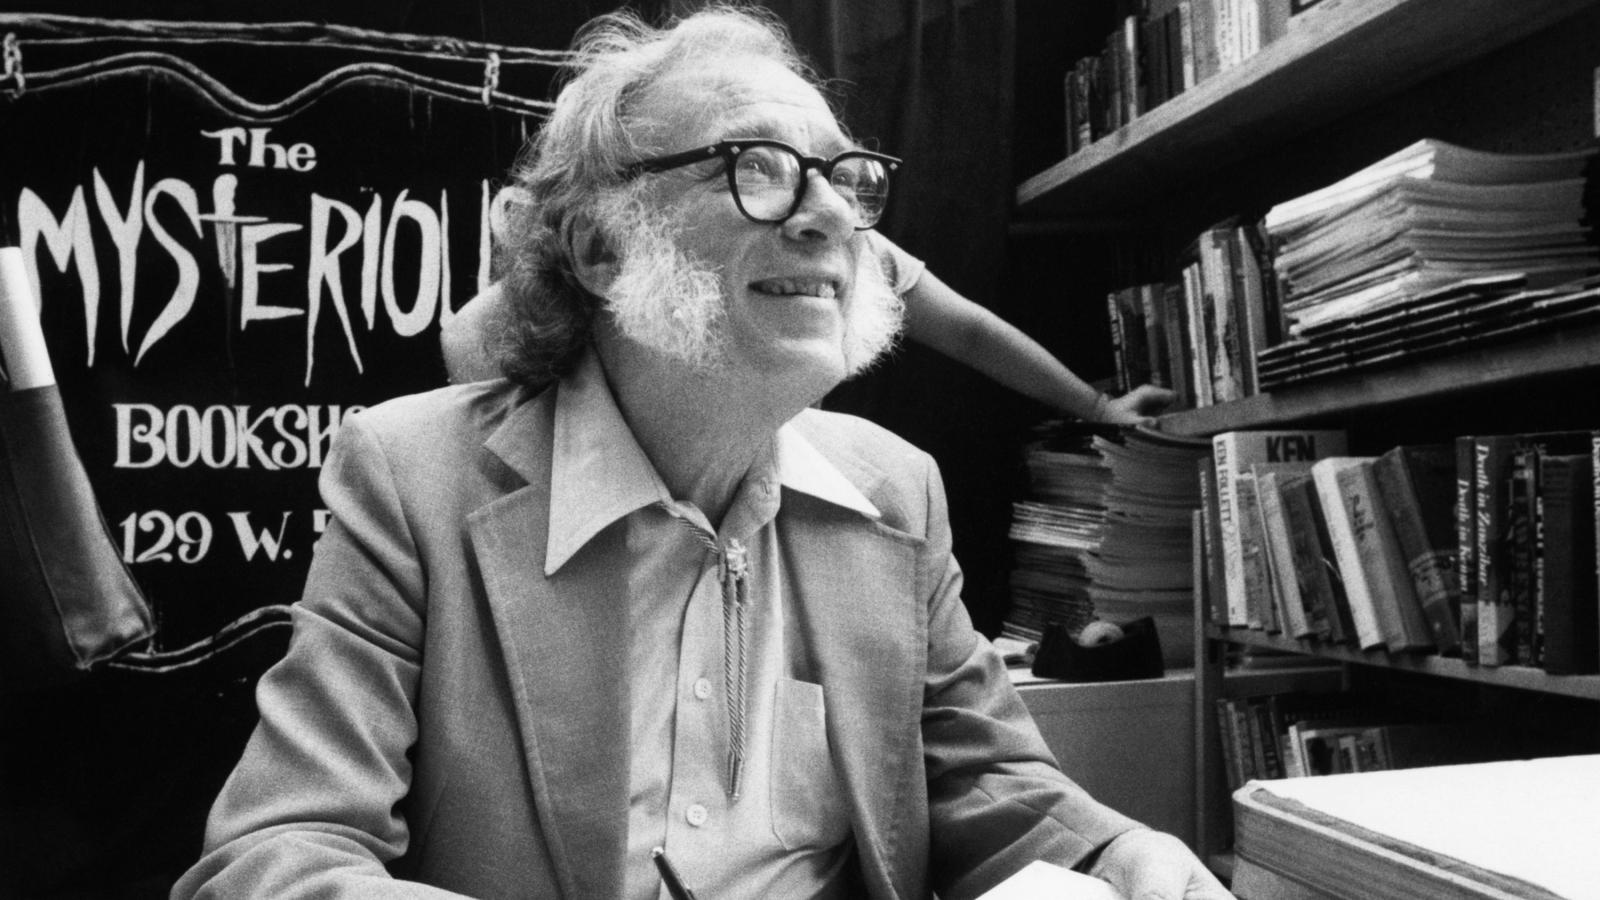 Isaac Asimov wrote almost 500 books in his lifetime—these are the six ways he did it